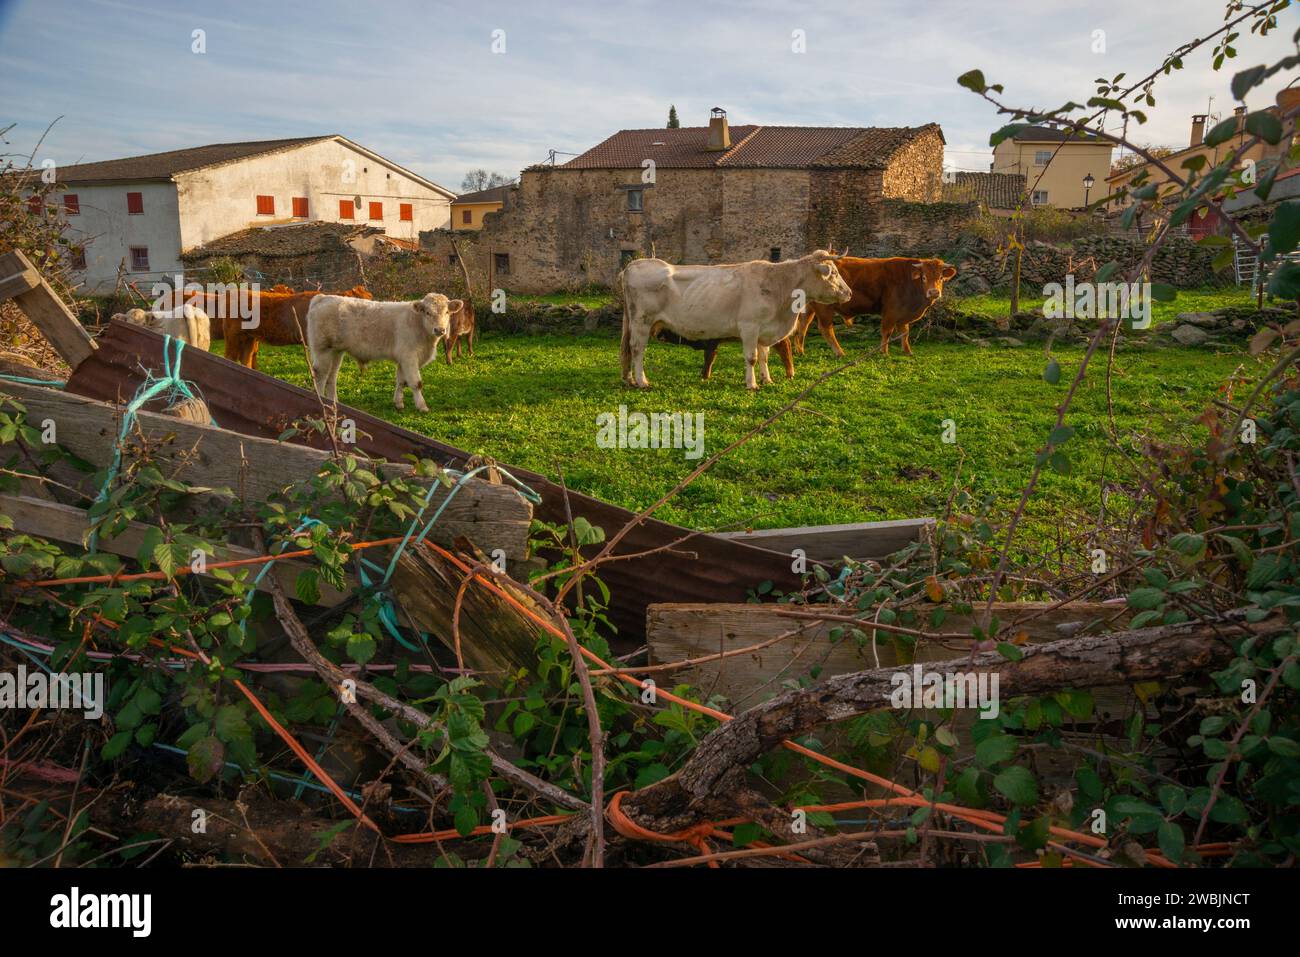 Cows in a pen. Piñuecar, Madrid province, Spain. Stock Photo